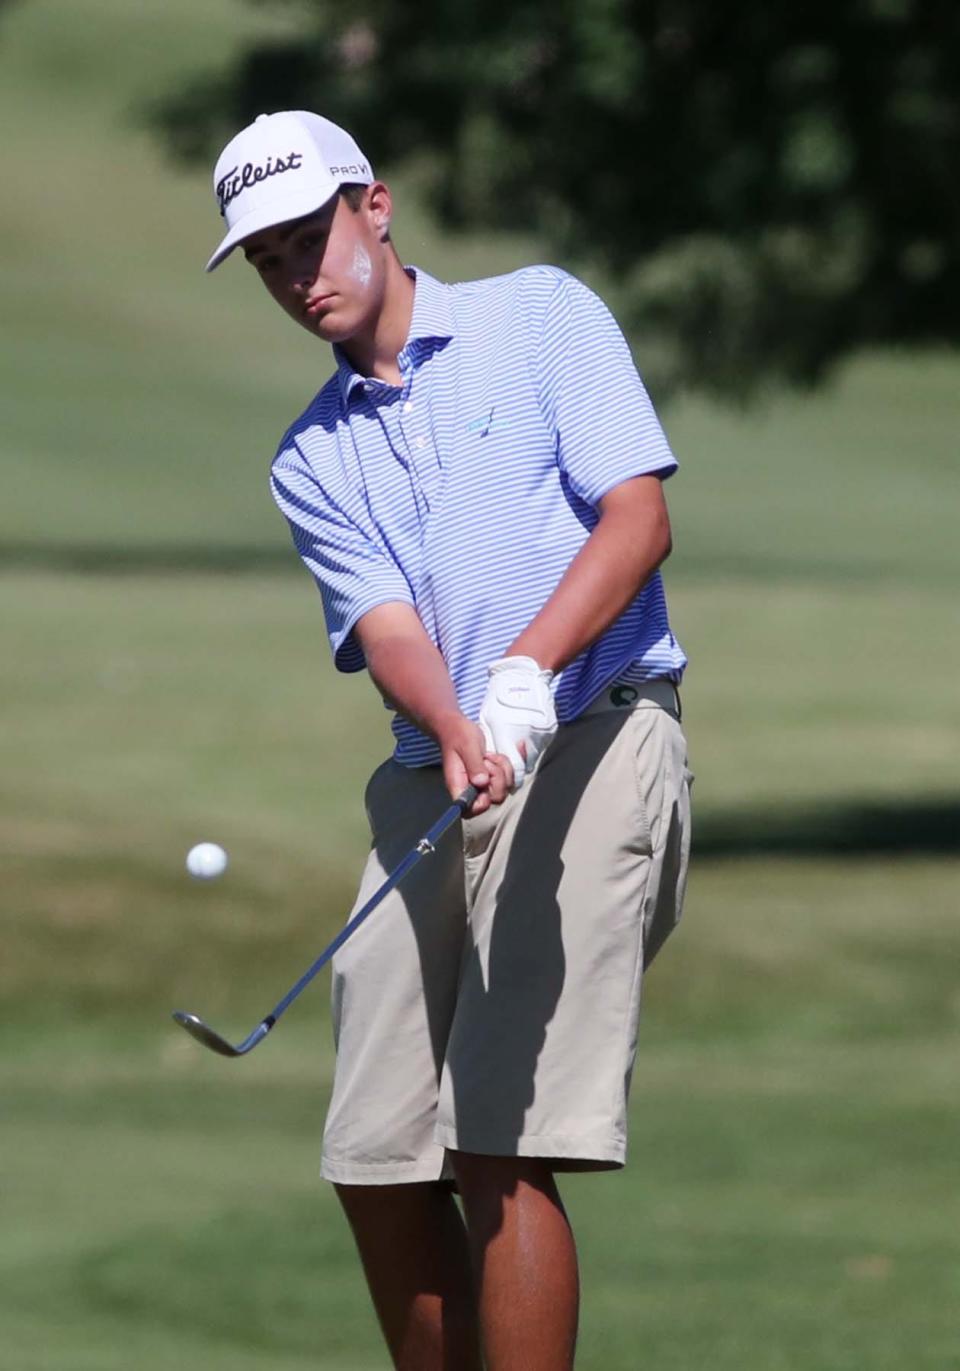 Bradley Chill of Columbia Station chips onto the 18th green during the Hudson Junior Golf Tournament at the Country Club of Hudson in Hudson on Thursday. He won the tournament.